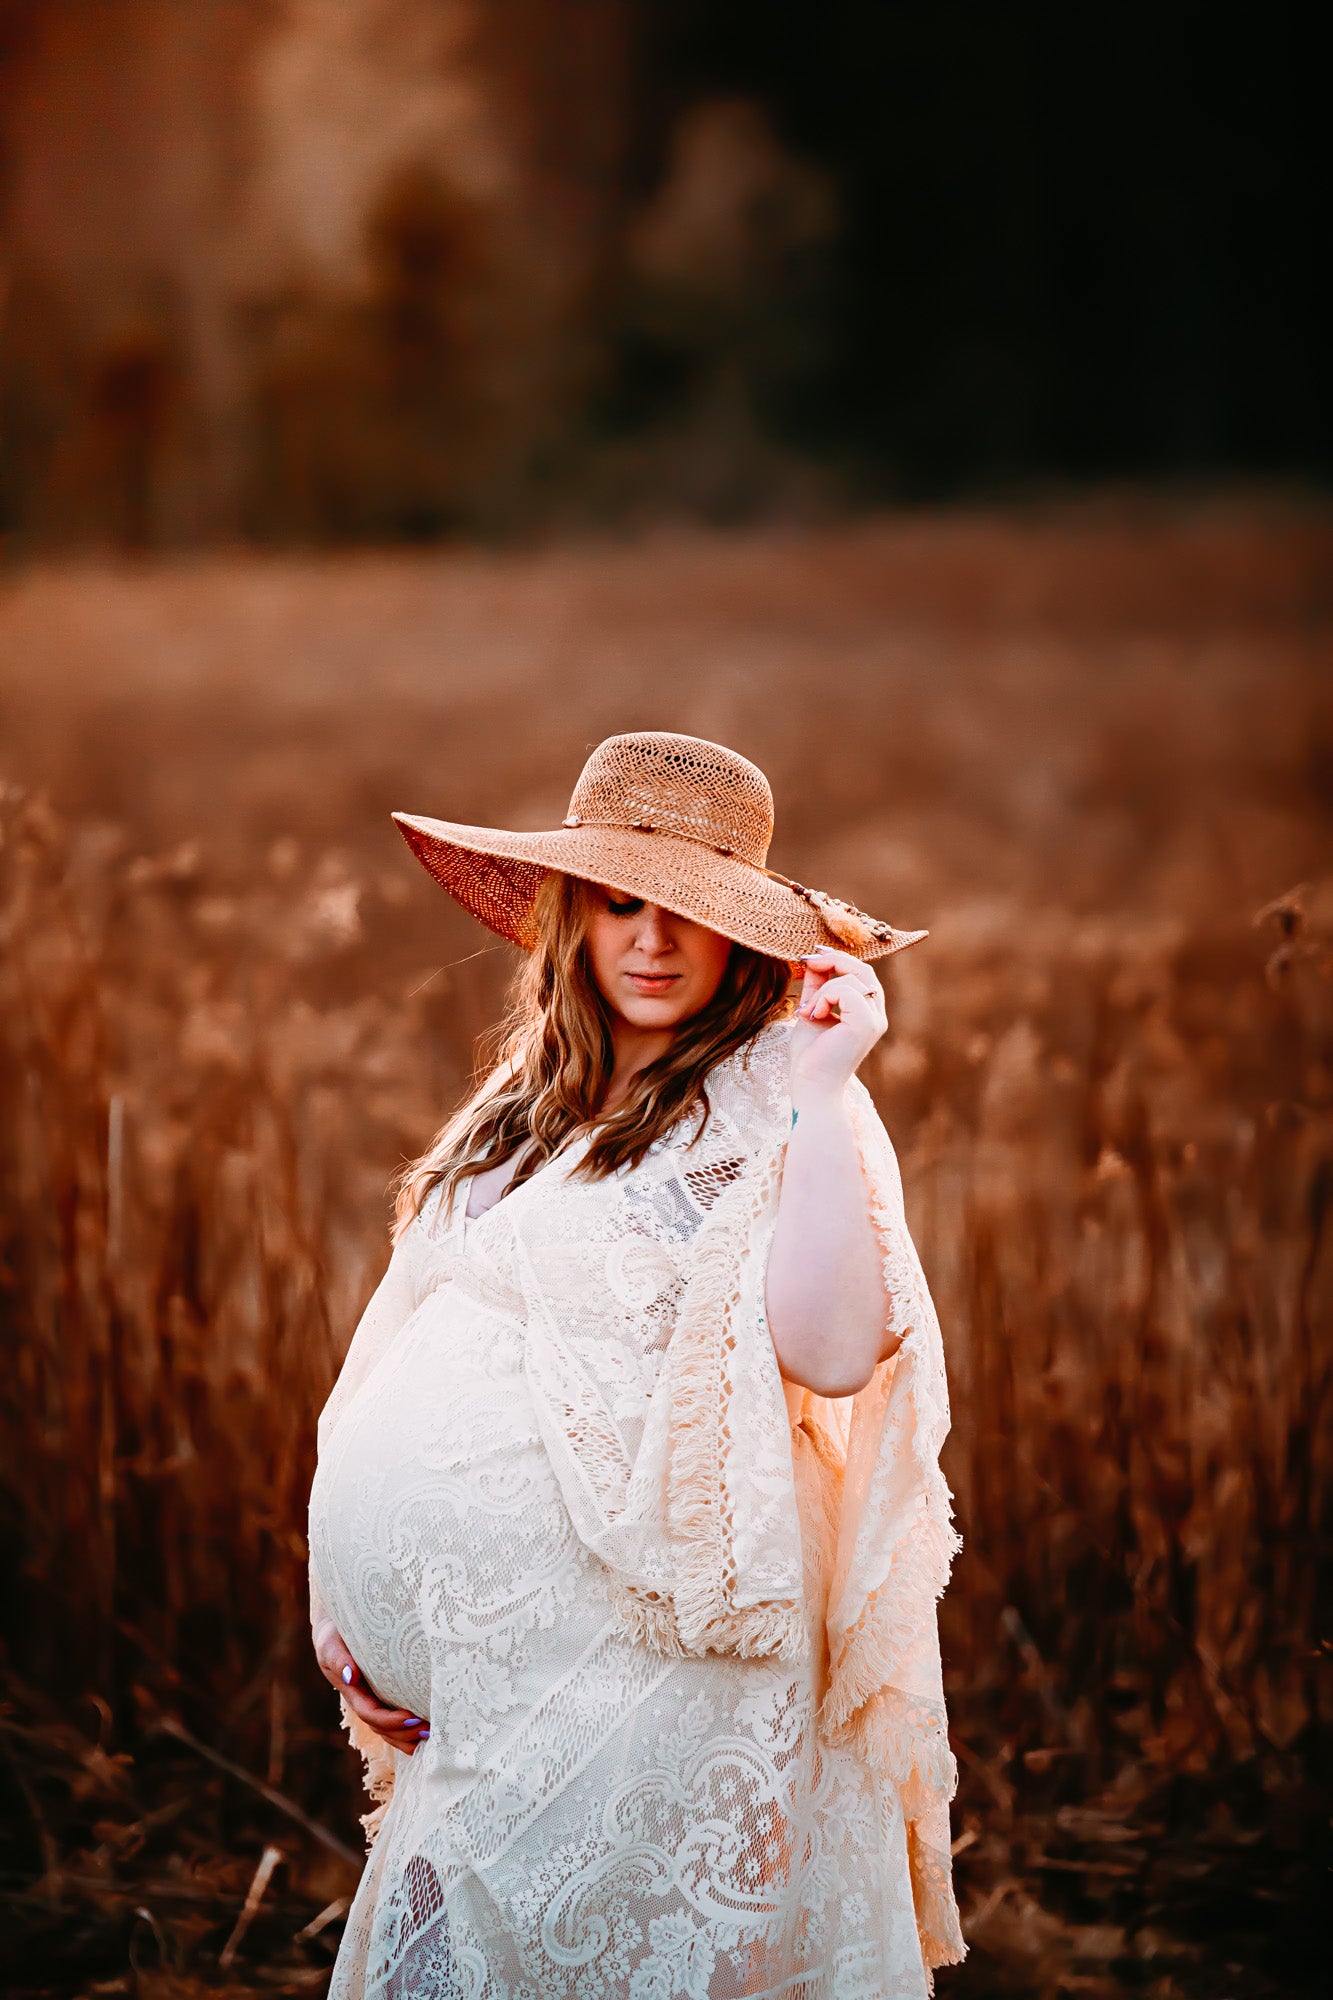 Boho Lace Maternity Gown with Tassels - maternity photoshoot dress